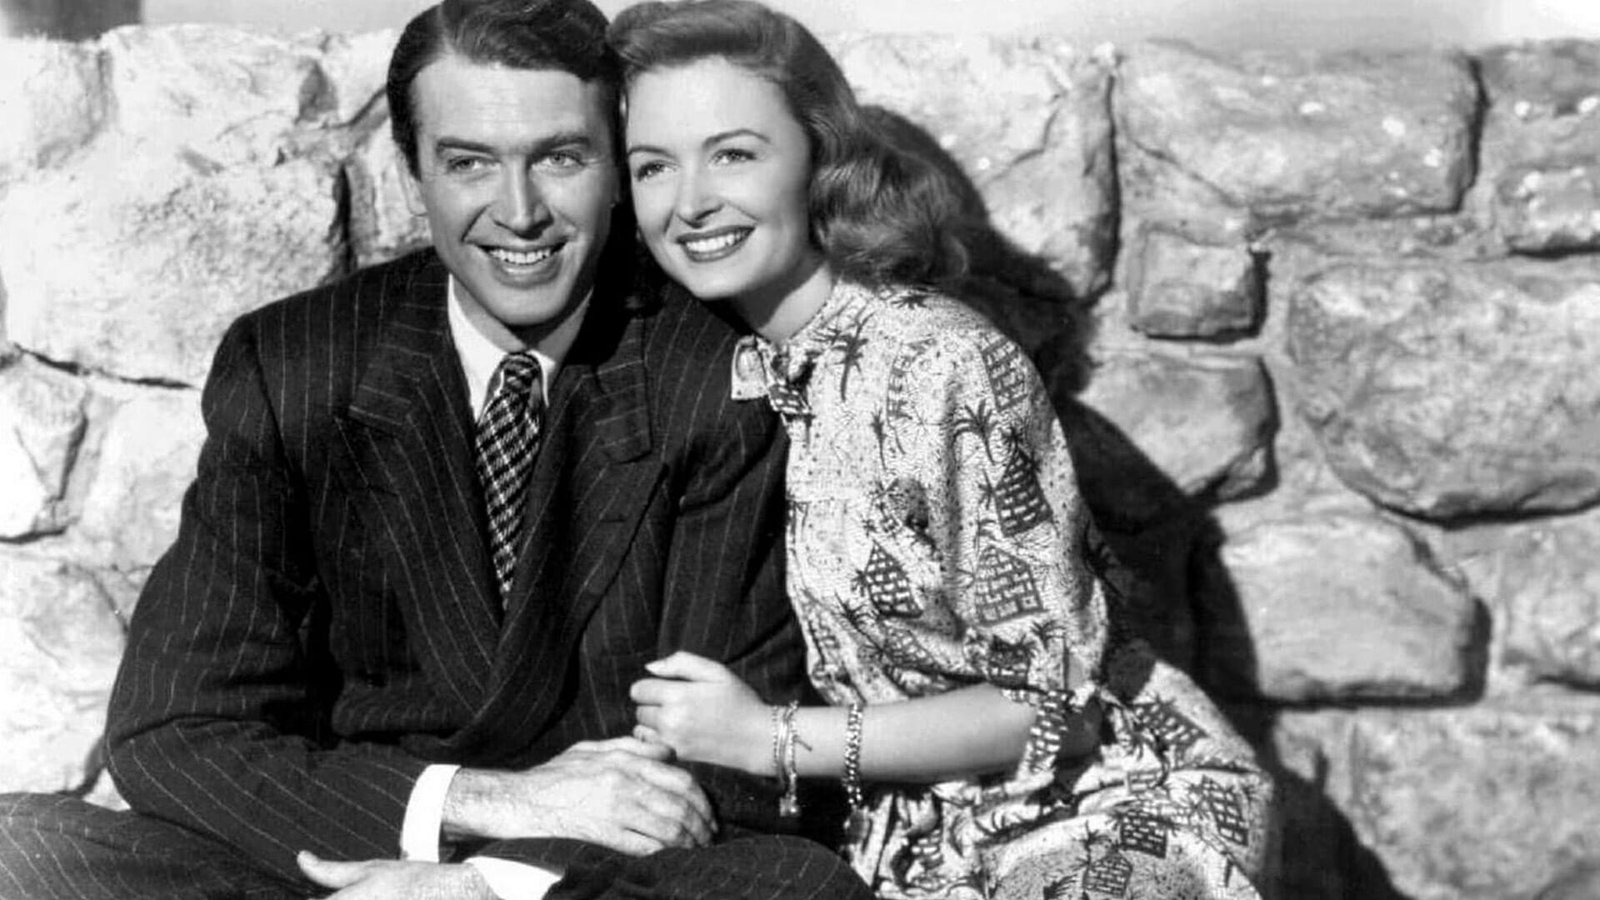 new movies on amazon prime: It's a Wonderful Life